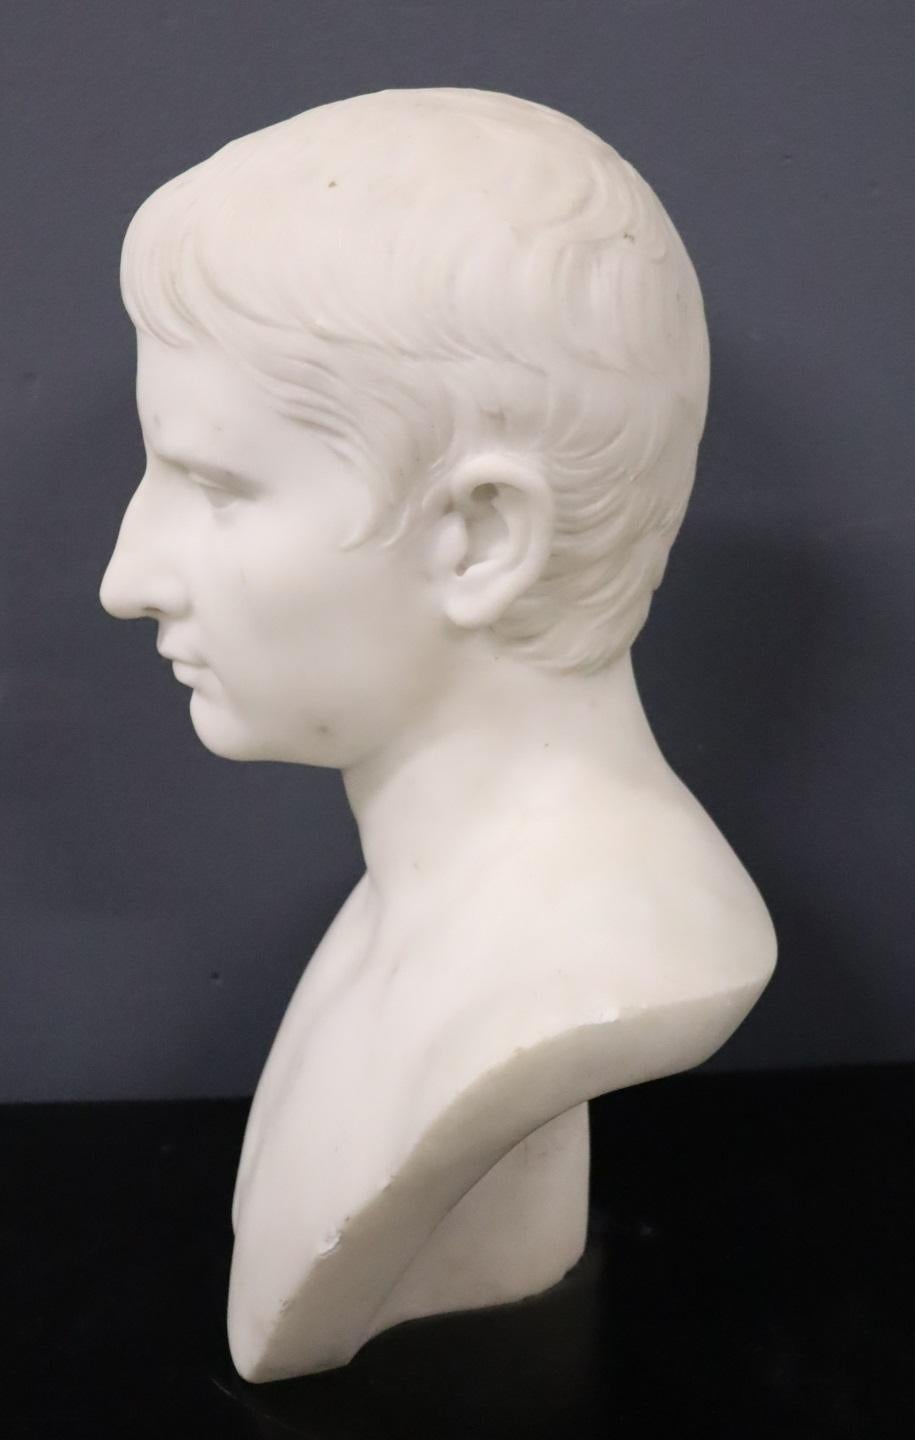 ANTIQUE ITALIAN NEOCLASSICAL MARBLE BUST OF EMPEROR OCTAVIAN, SIGNED CLERICI - Black Figurative Sculpture by Leone Clerici (19th C.) 